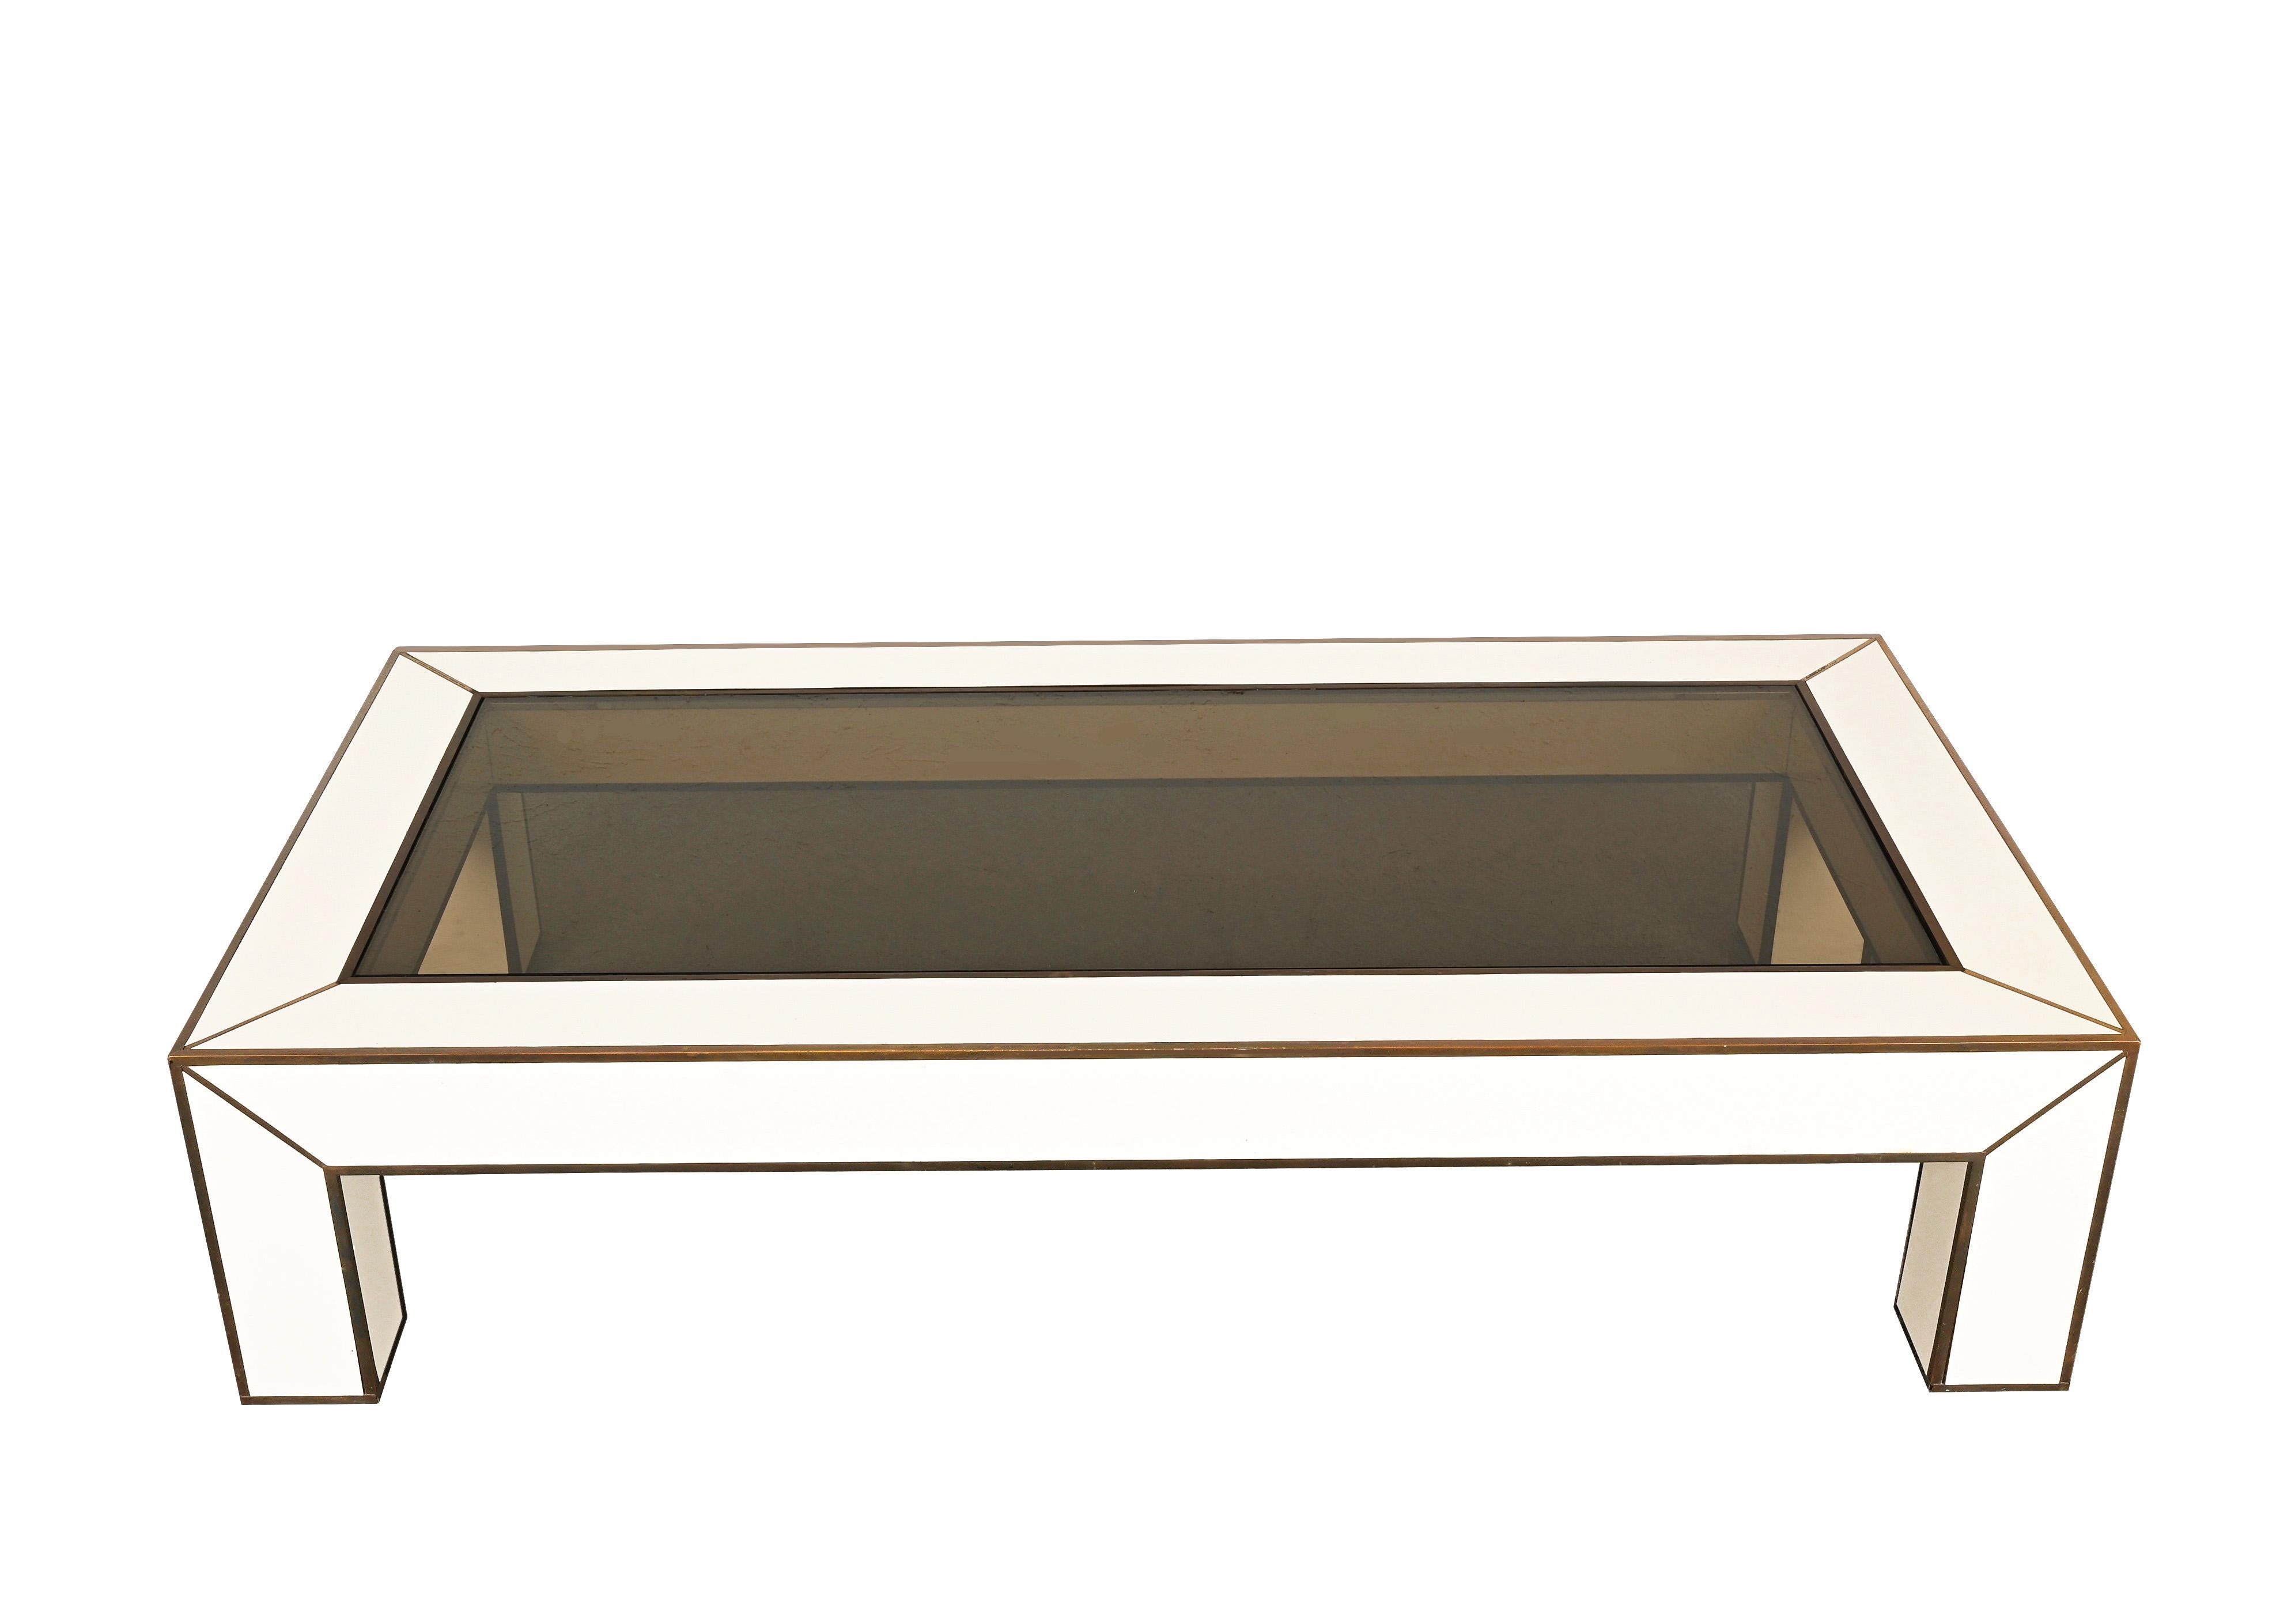 Fantastic and large mid-century low table in brass and white formica laminate. This wonderful piece is inspired by Willy Rizzo's production and was designed in Italy during the 1970s.

This fantastic item has brass finishes with a beautiful patina